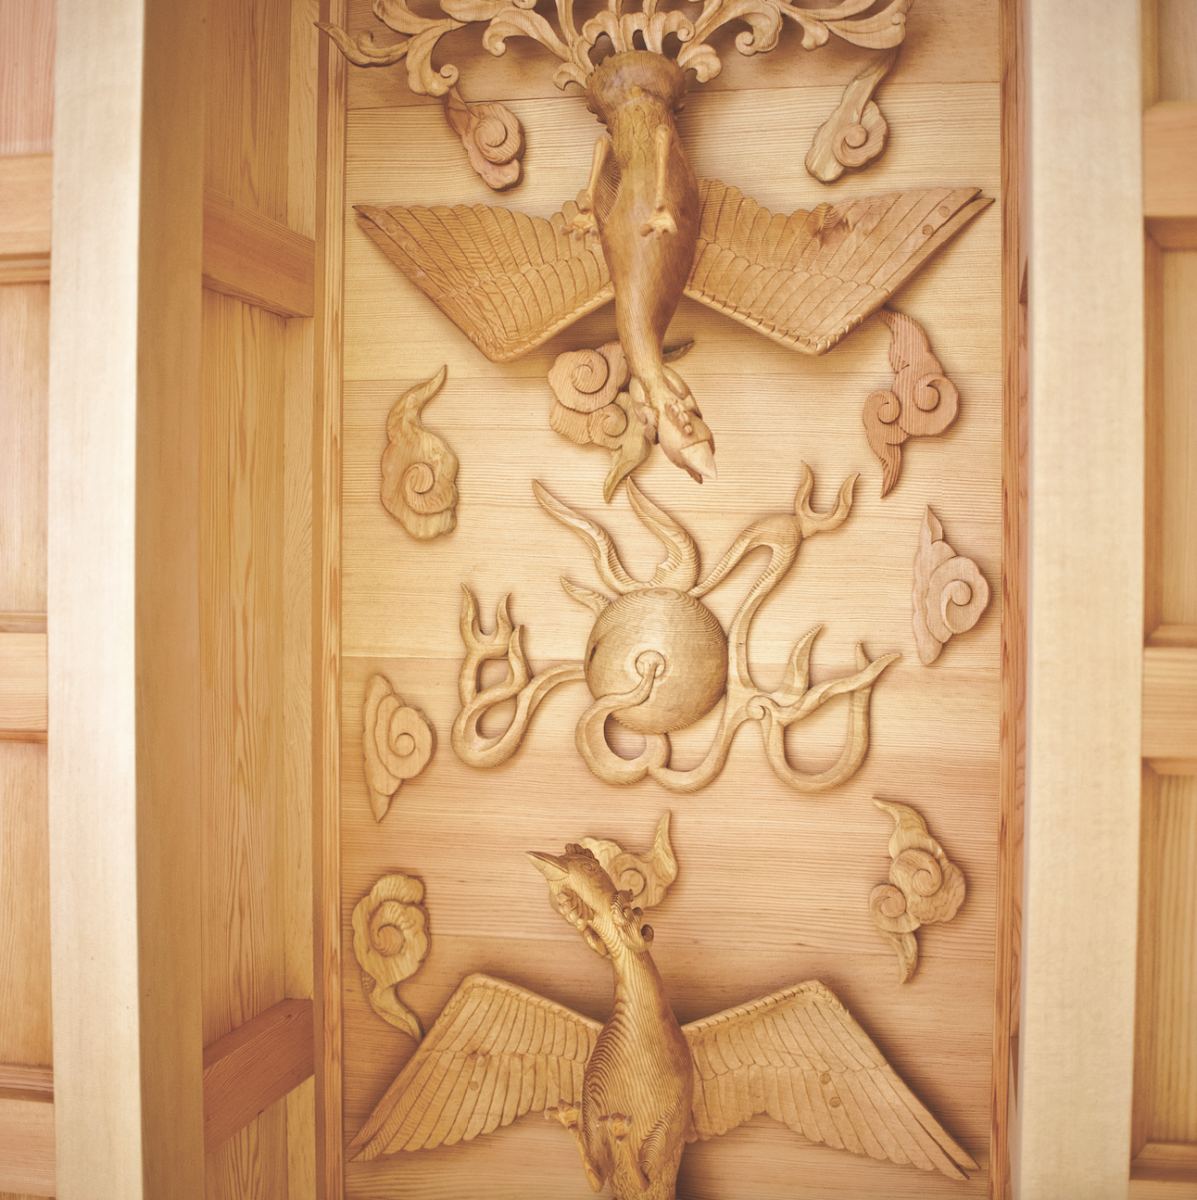 The Classroom's ceiling, featuring two wooden phoenixes forming the symbolic pearl of wisdom.